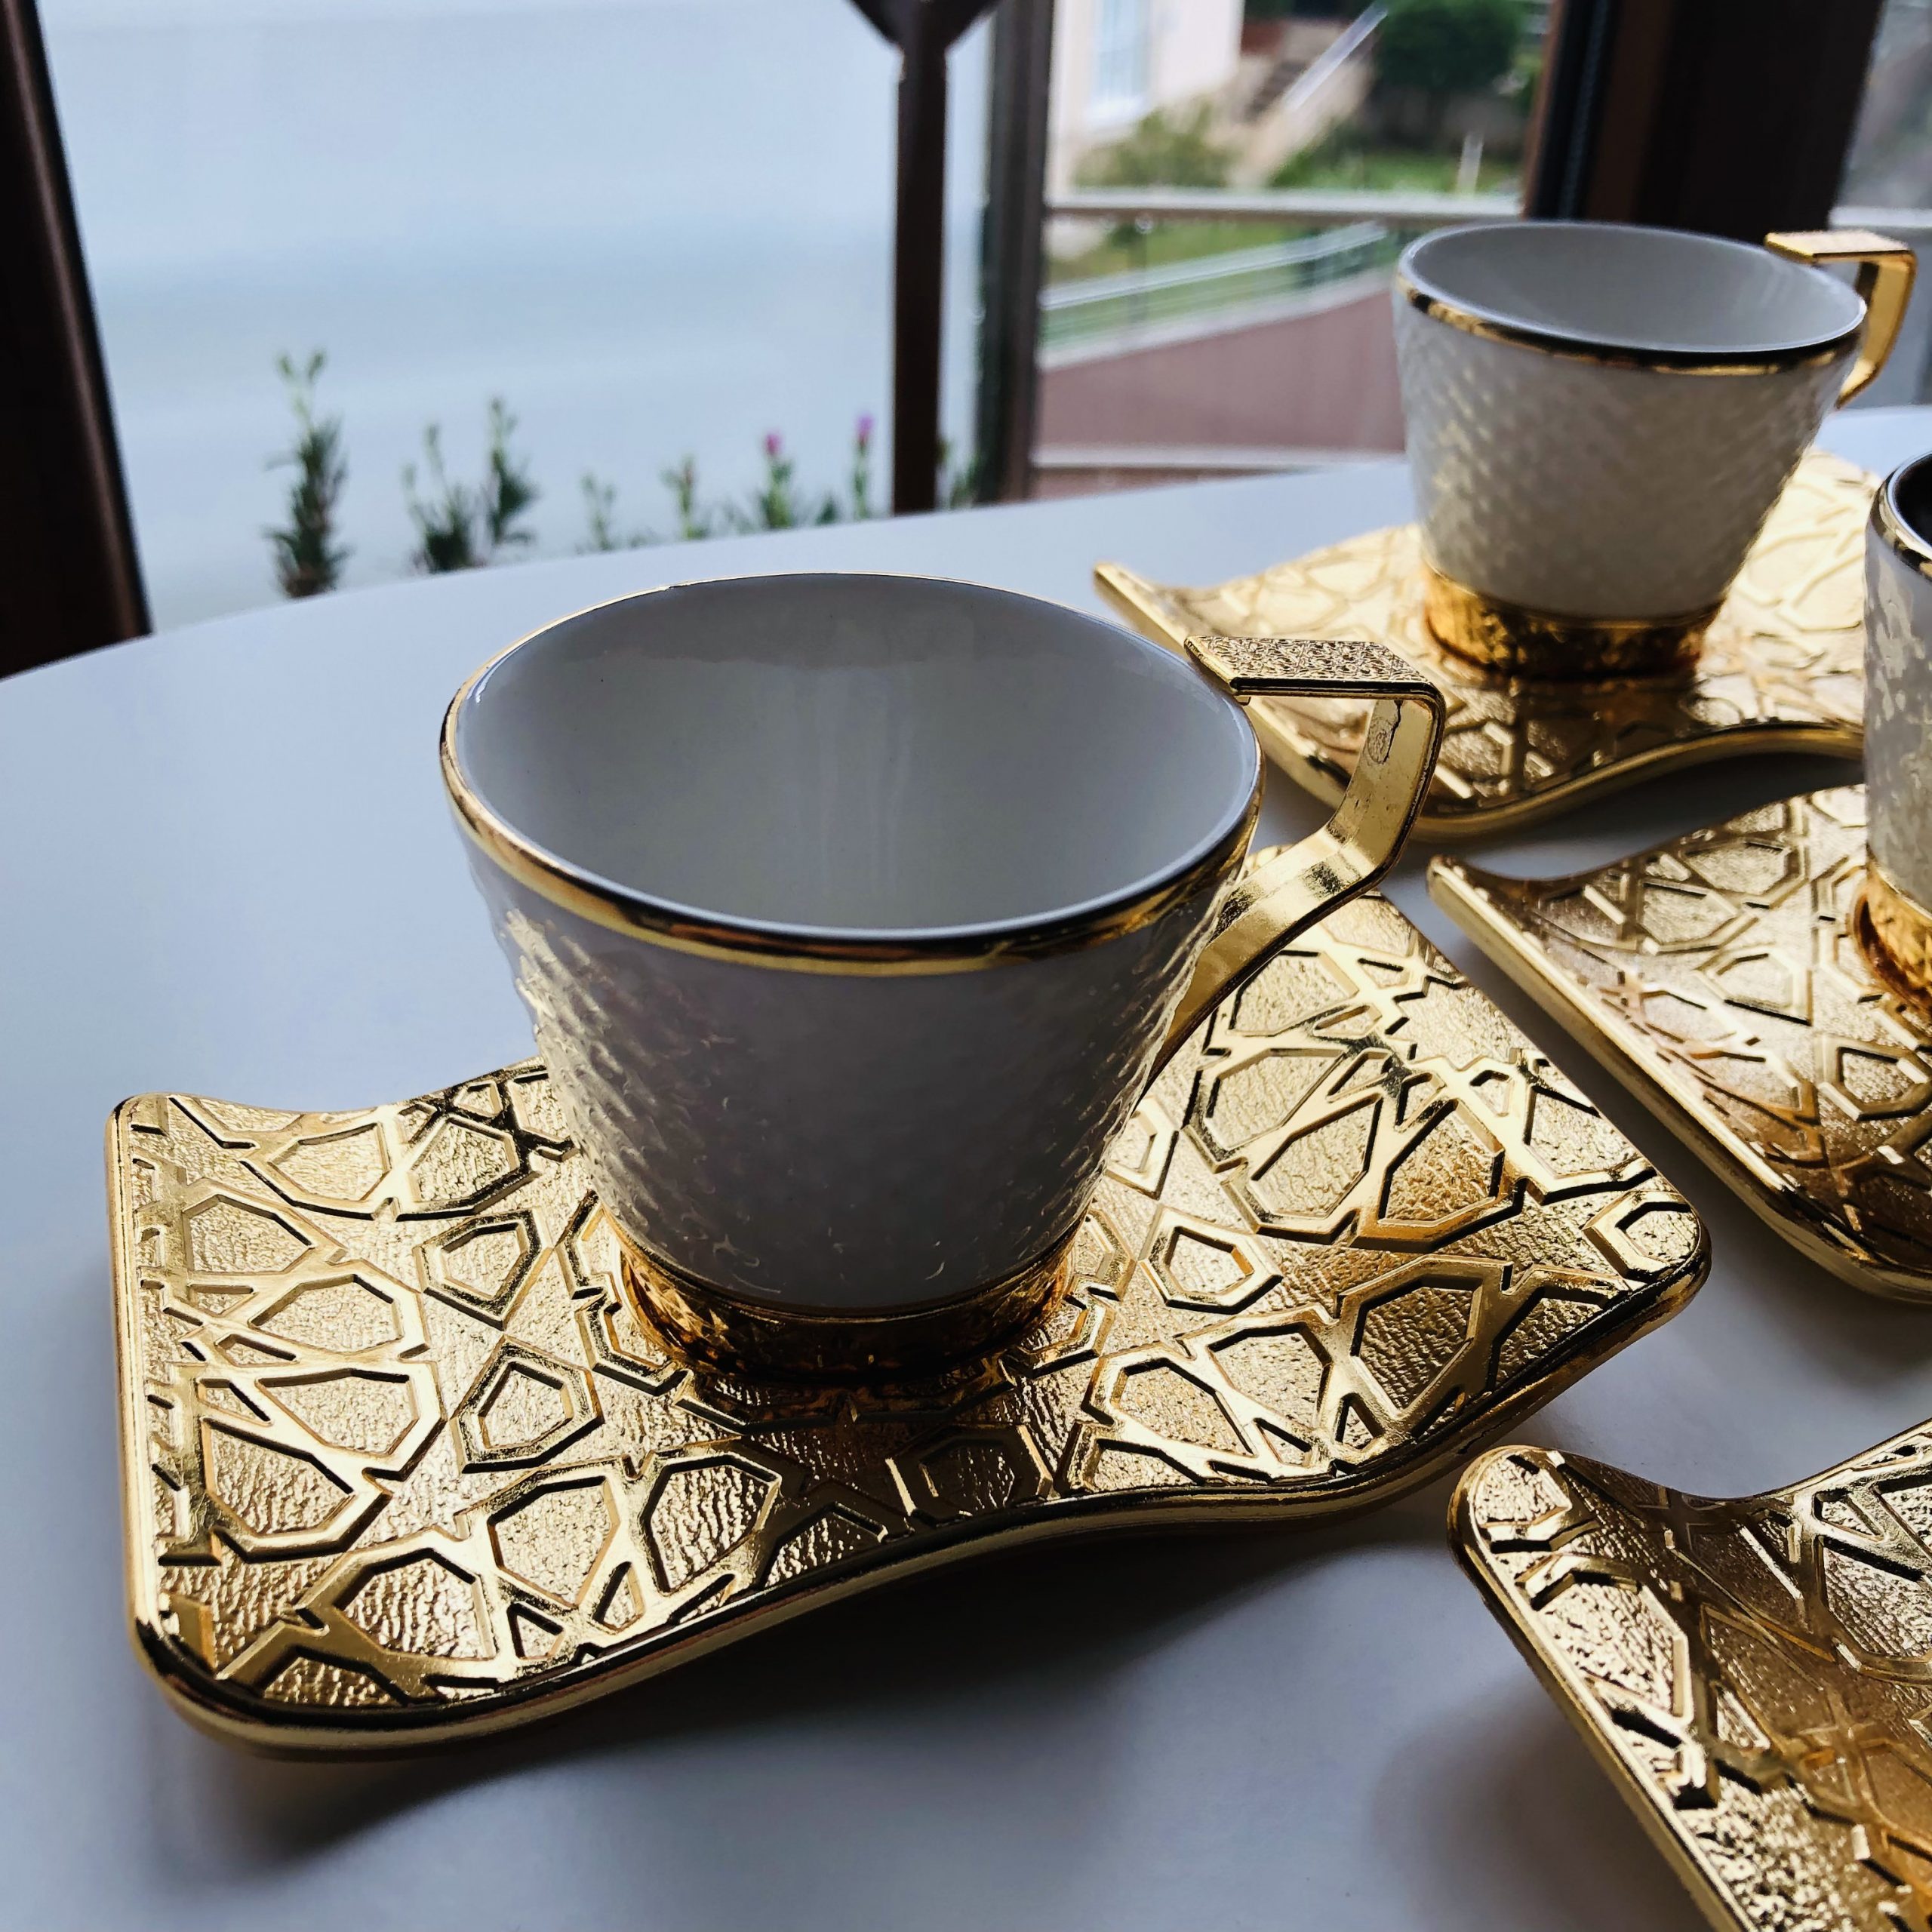 https://traditionalturk.com/wp-content/uploads/2021/05/luxury-gold-color-turkish-coffee-cup-set-for-six-person-3-scaled.jpeg